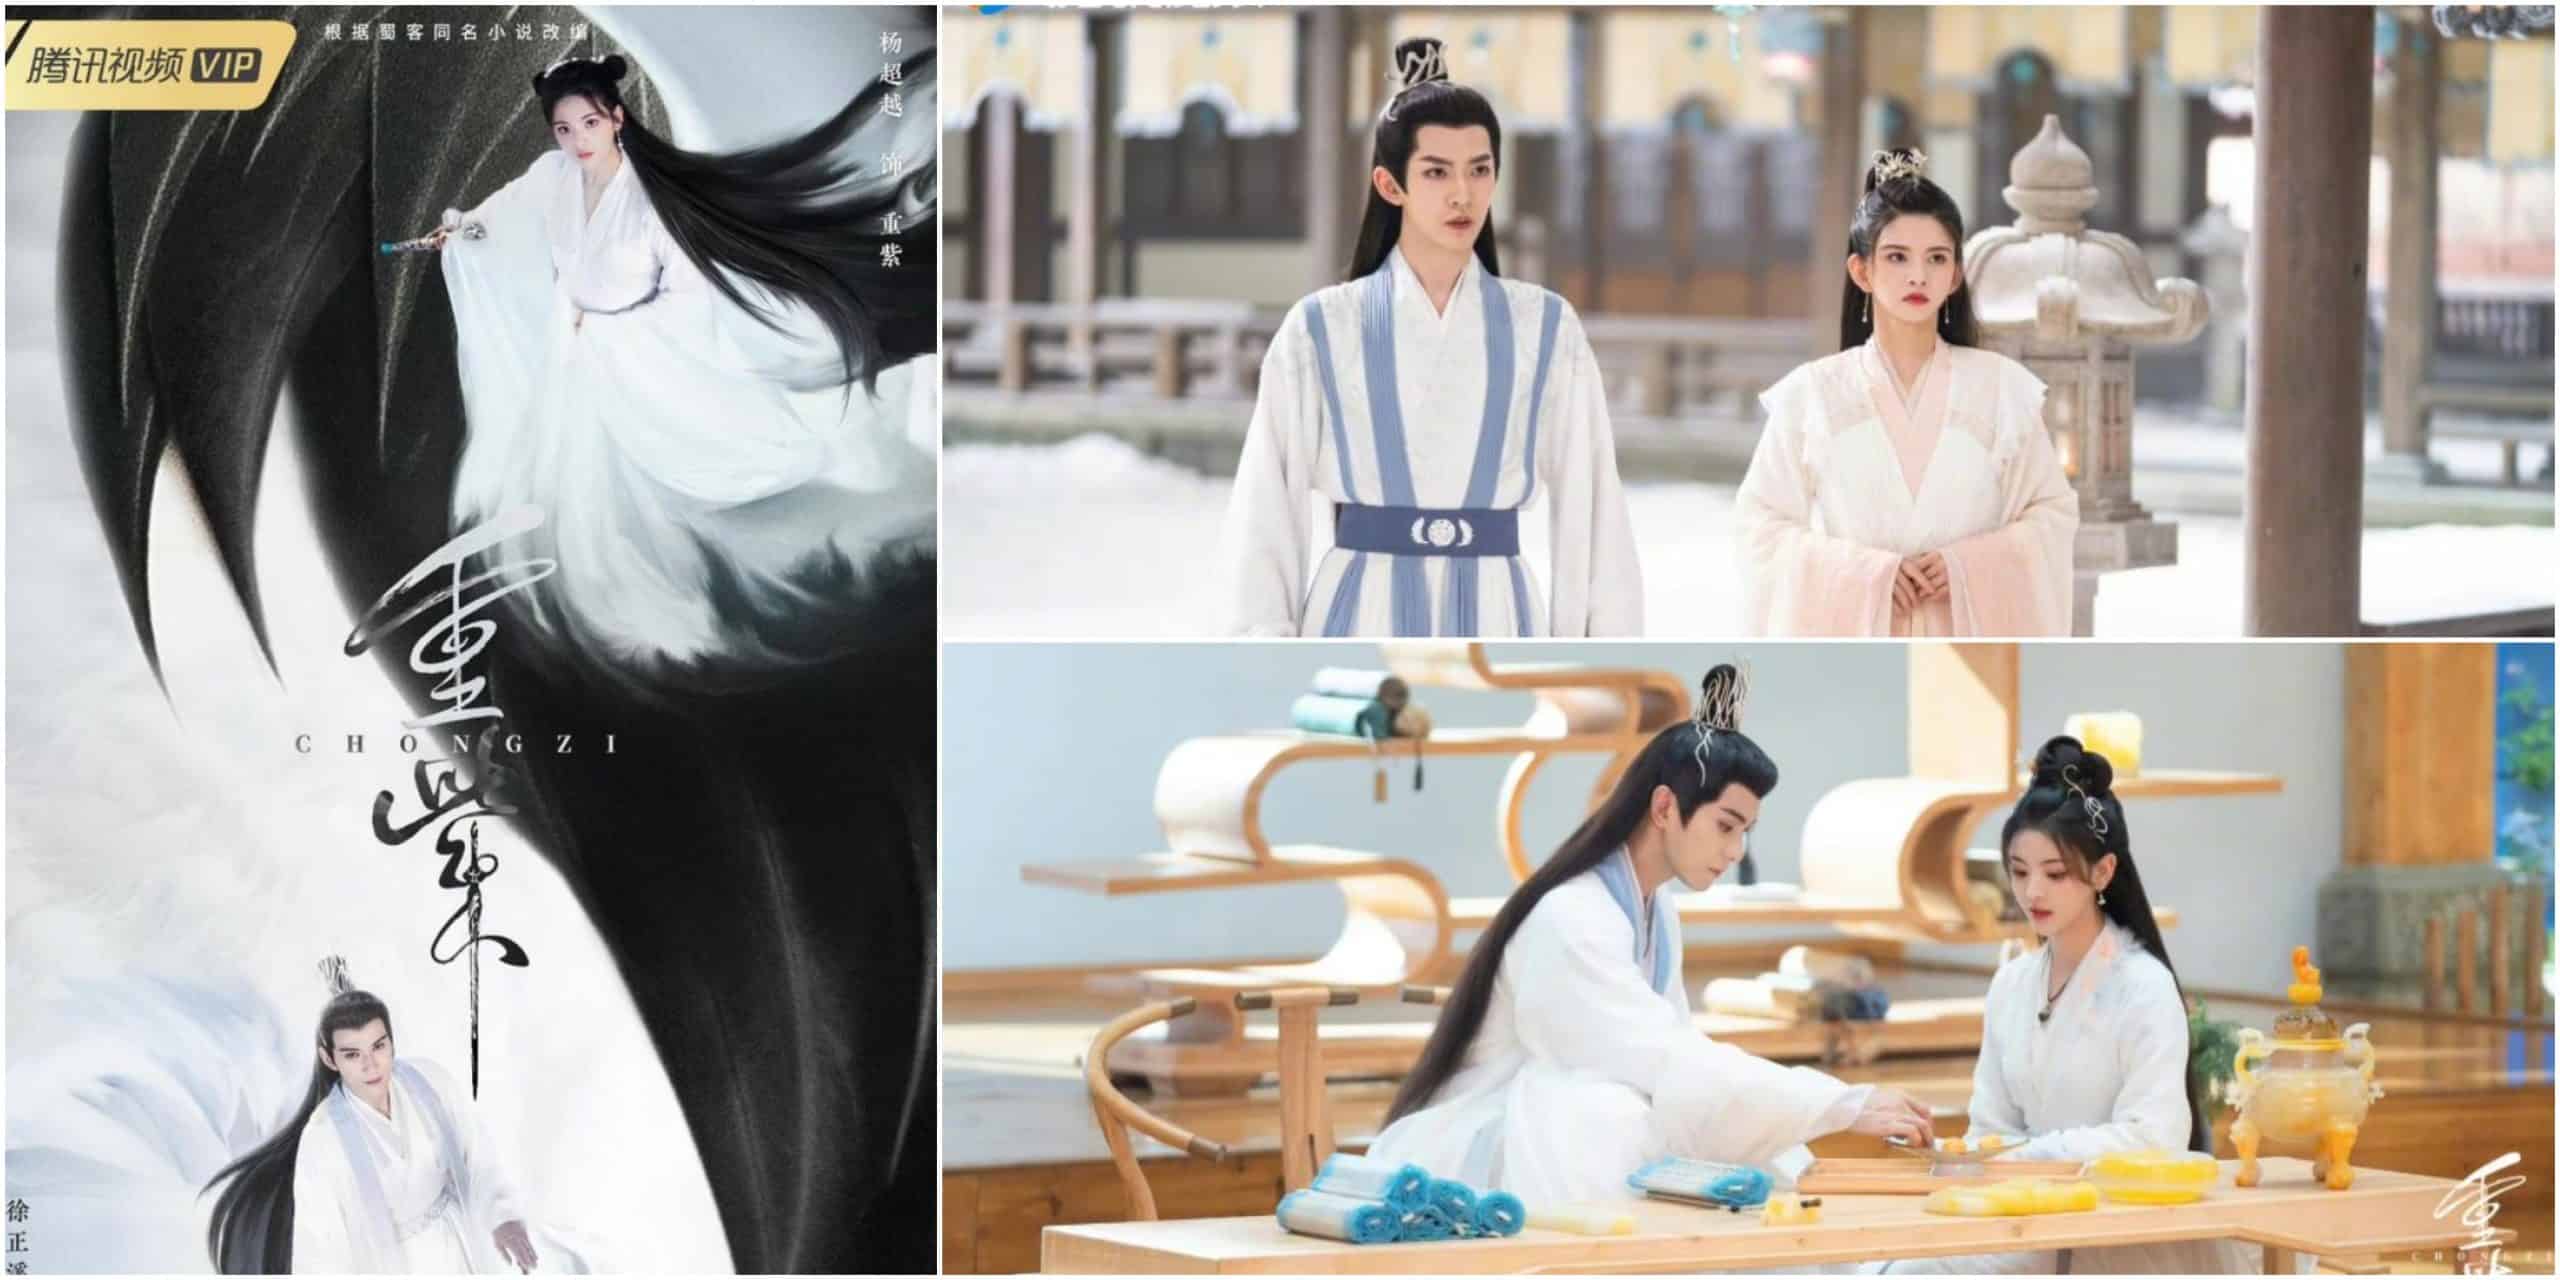 The Journey of Chong Zi Chinese Fantasy Drama Episode 34 Release Date